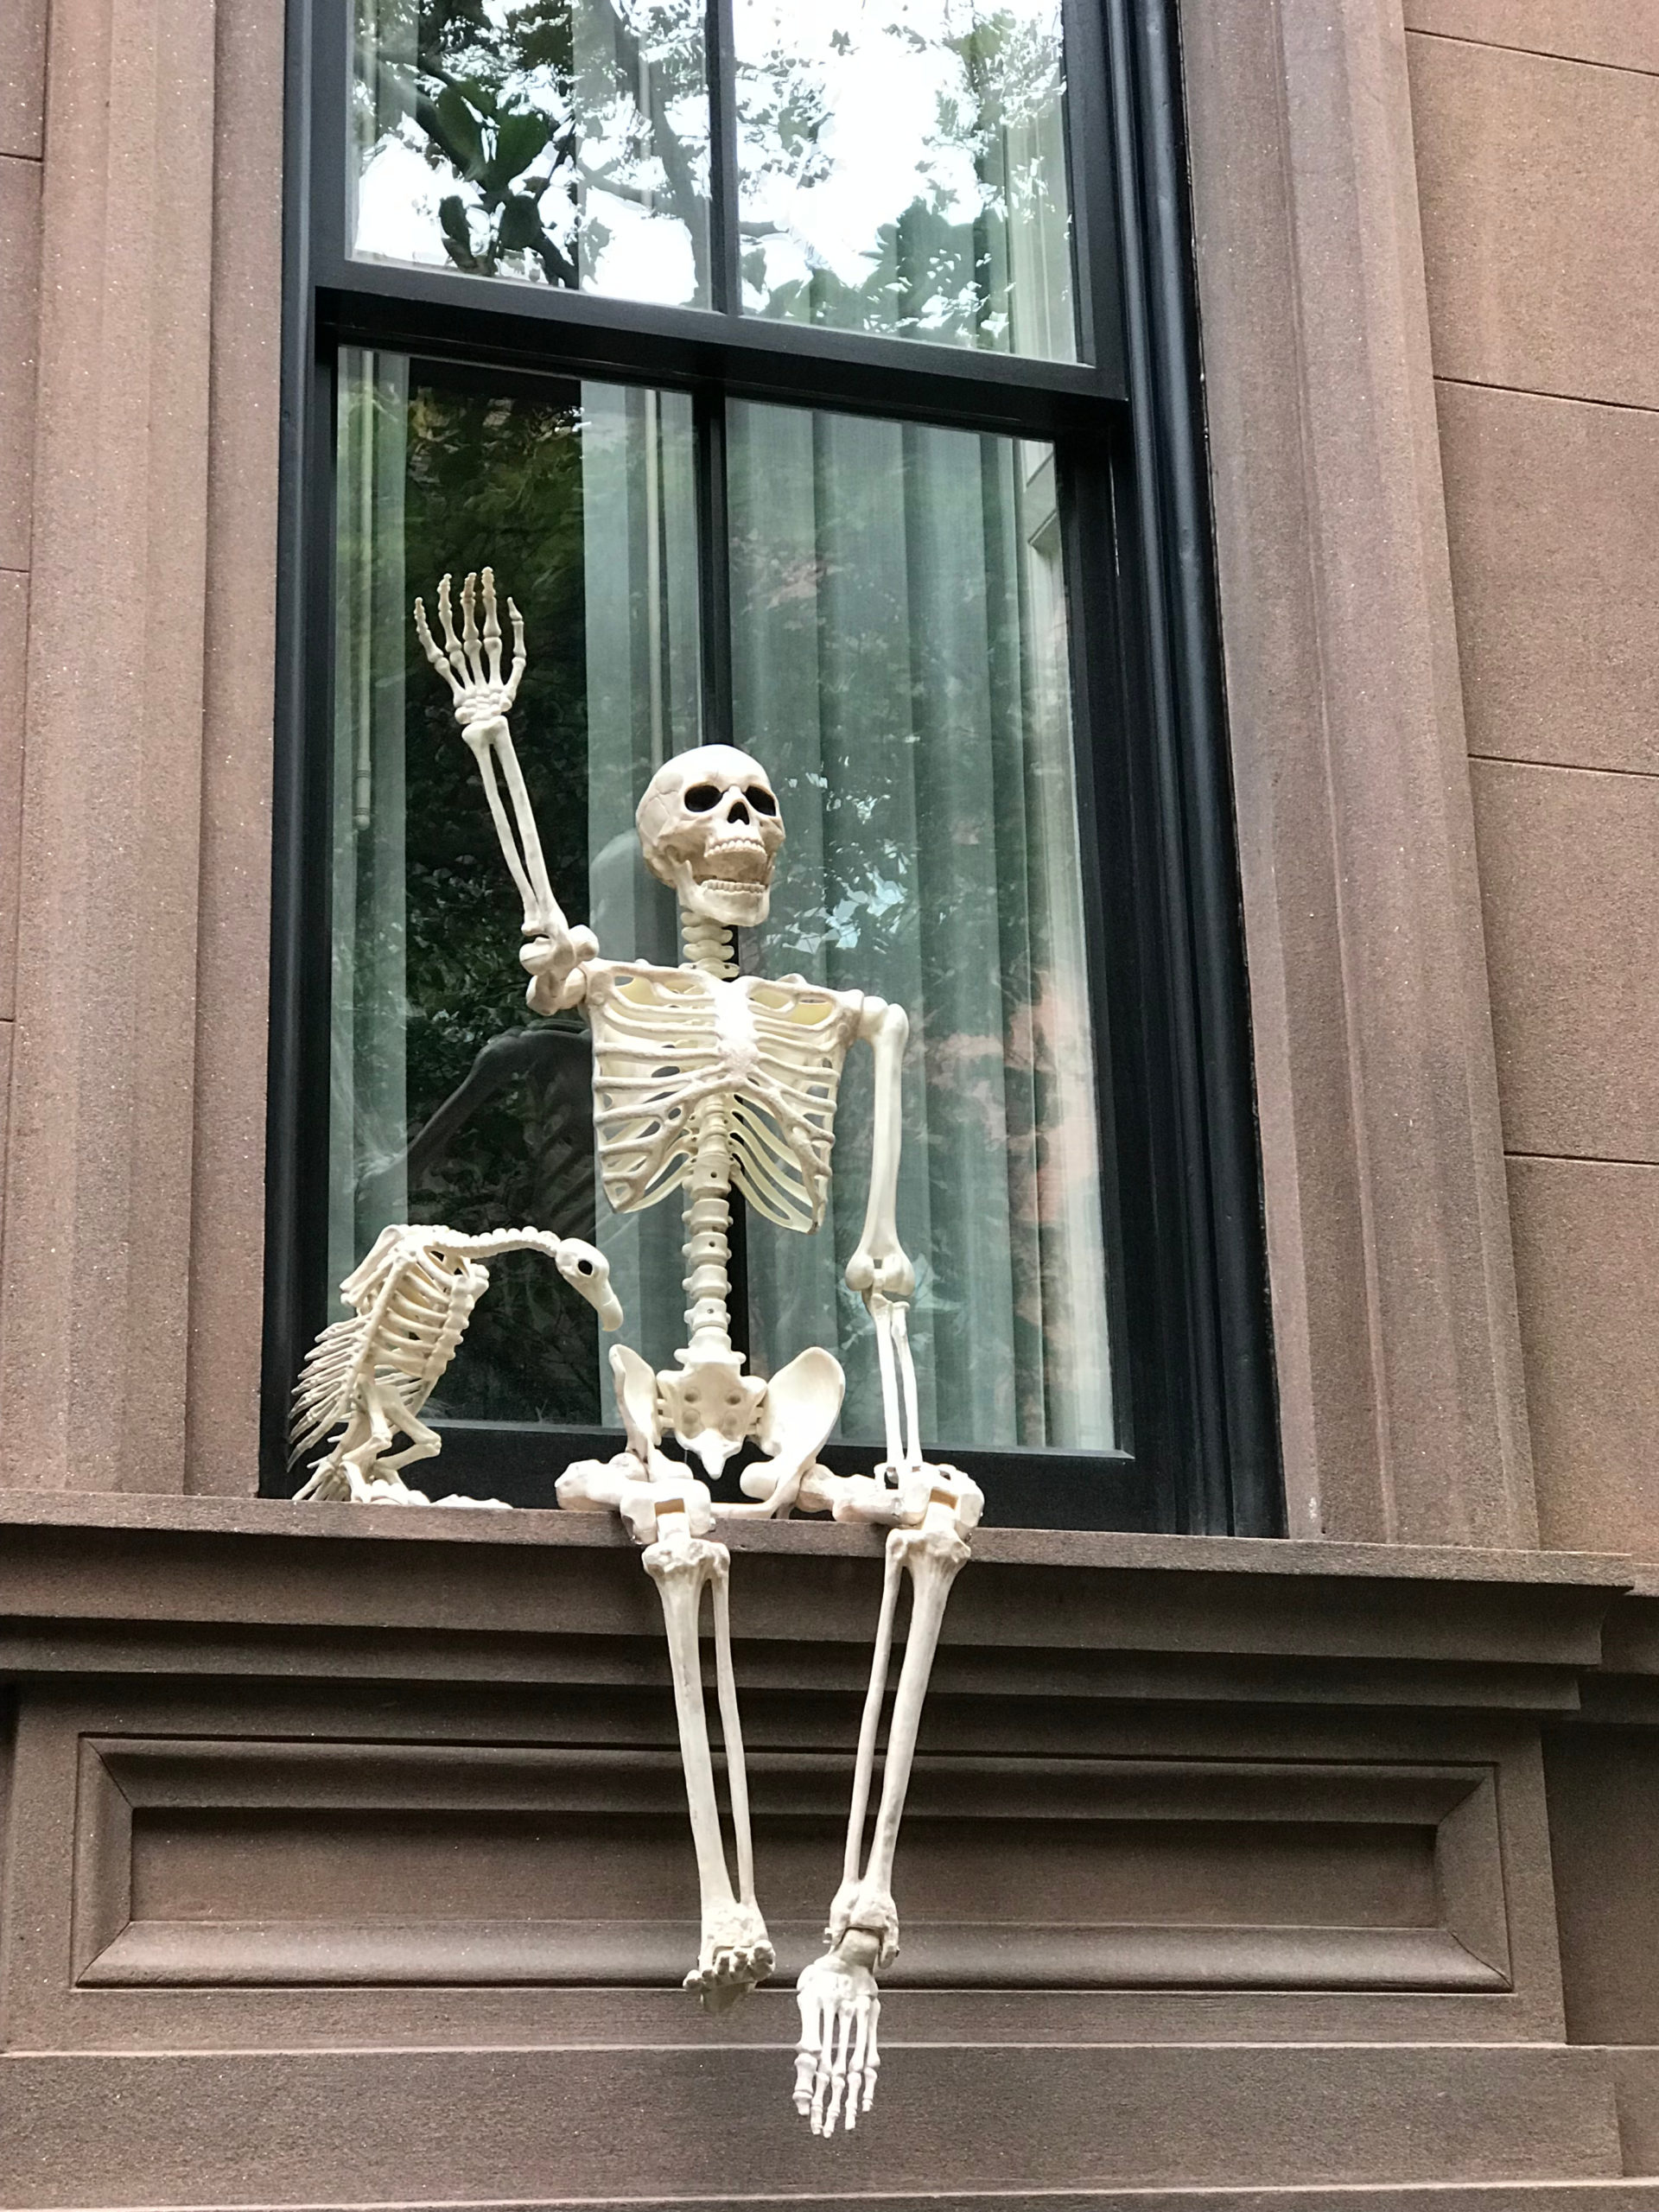 Unlock Halloween in NYC All-year Round - Halloween Skeleton Decoration outside a window in Greenwich Village, NYC